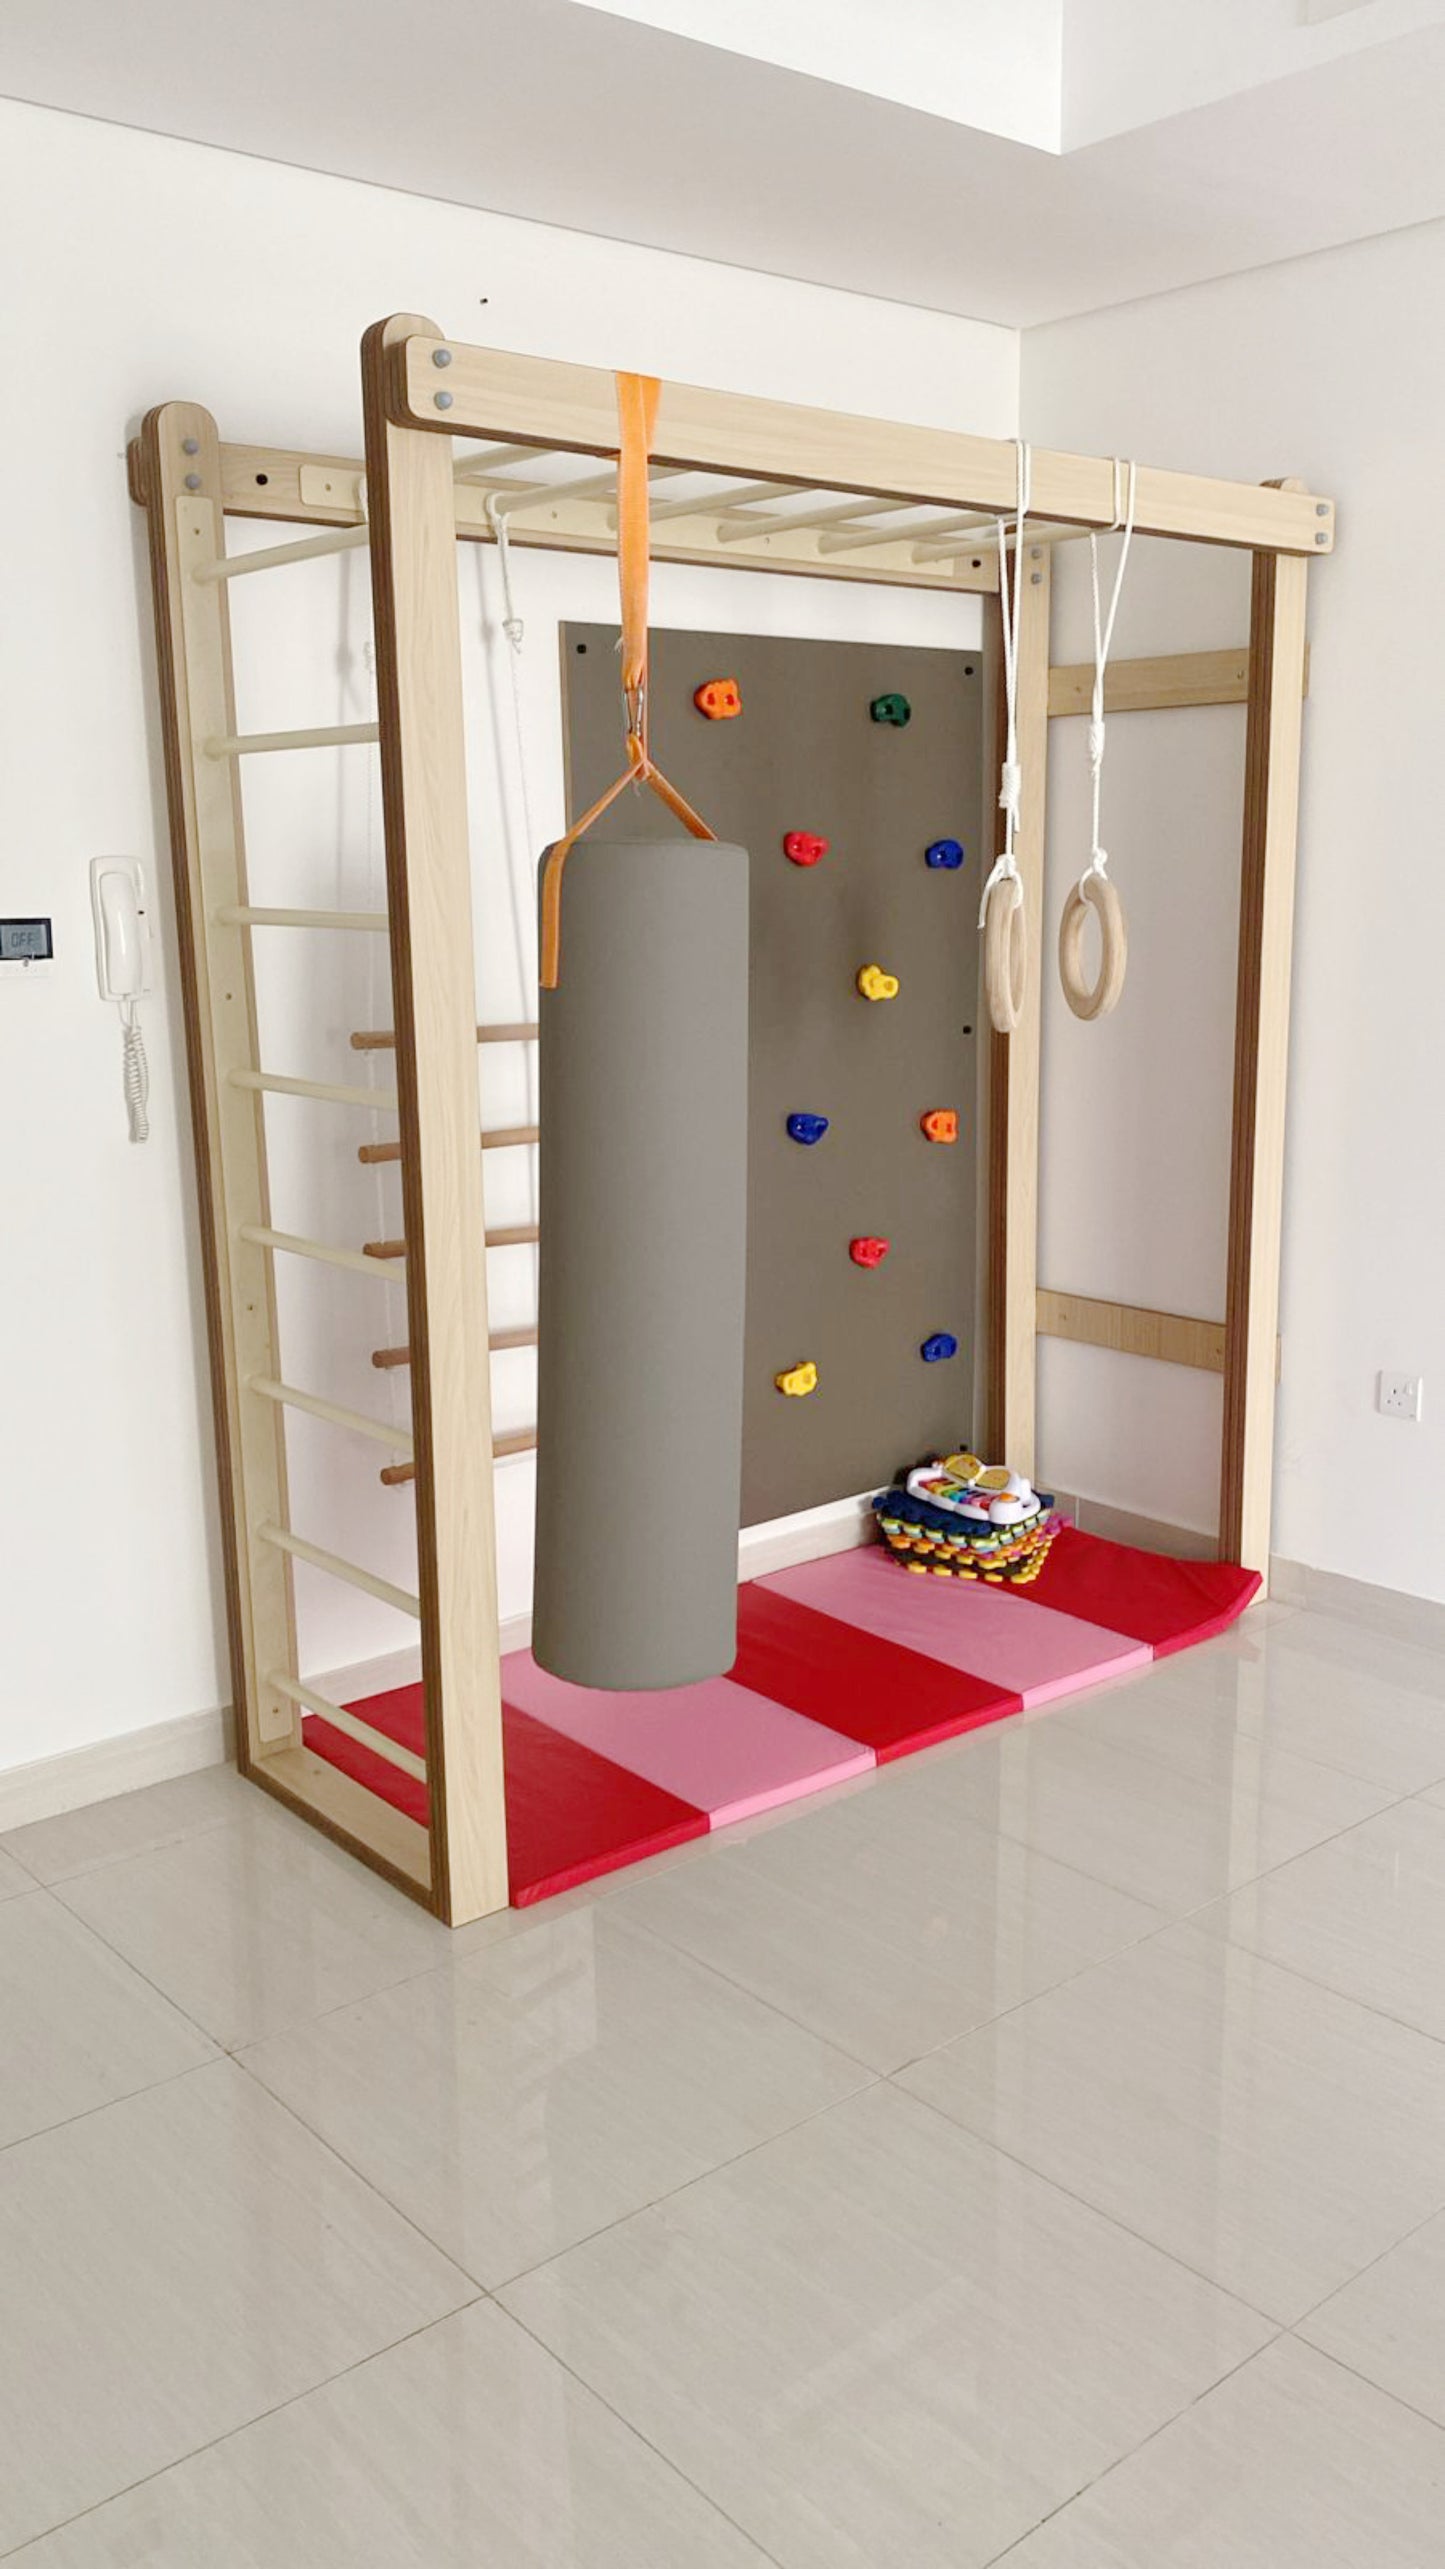 Ultimate Indoor Adventure: Monkey Bars, Climbing Wall, Punching Bag, Rope Ladder, and Safety Mats Set